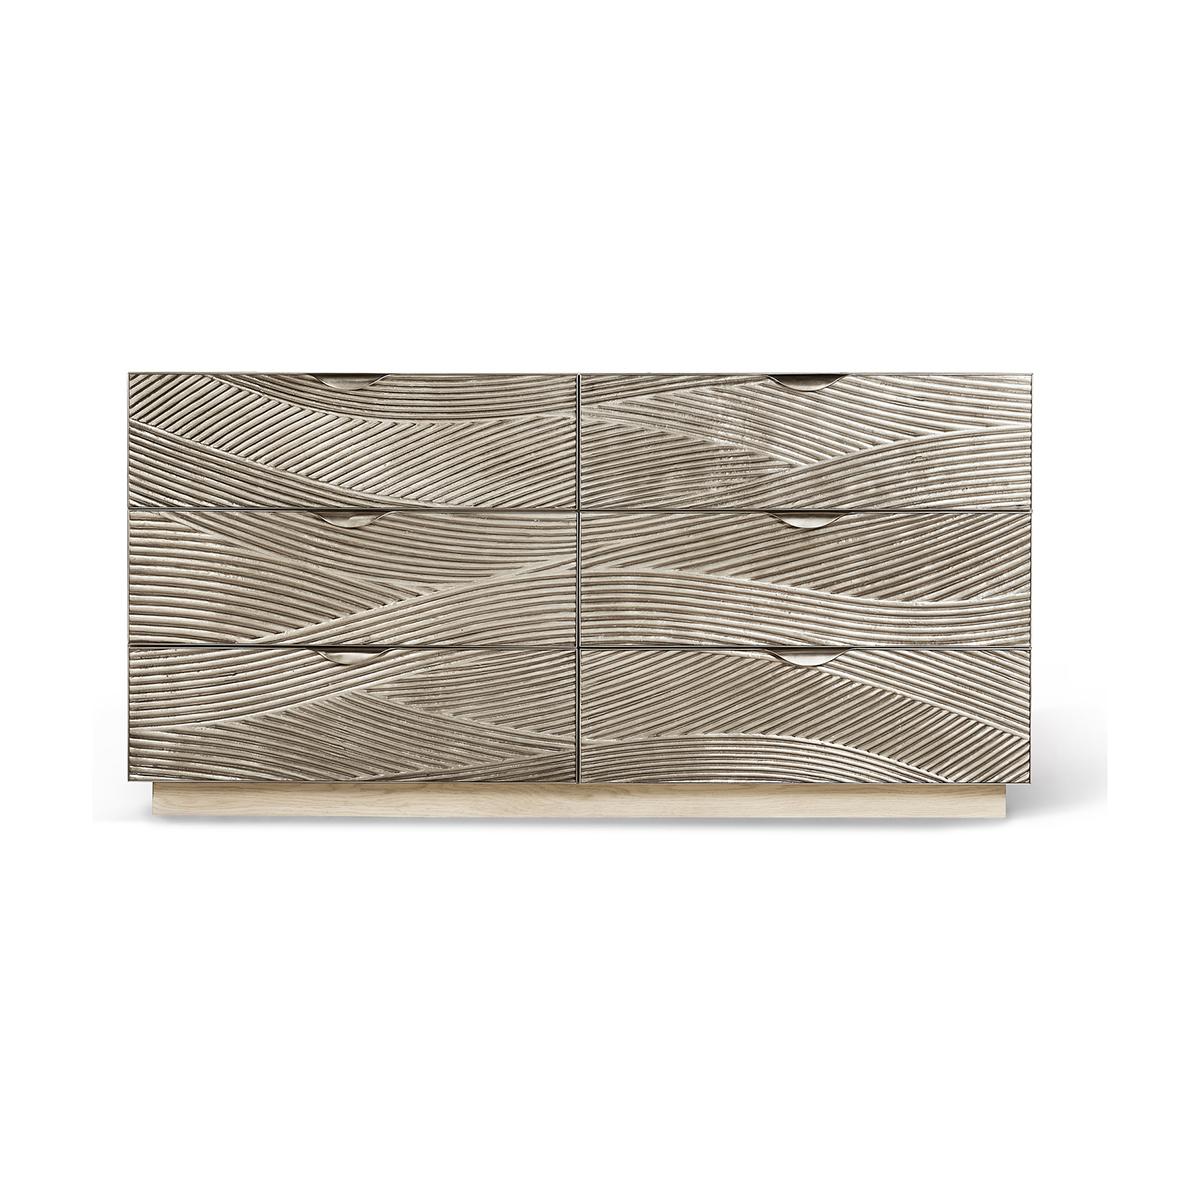 Coastal Modern Double Dresser, the cast metal texture double dresser features sculptural metal drawer fronts with a hand carved wave motif in satin white brass that shimmers against a bleached oak case.

Understated functional elements such as